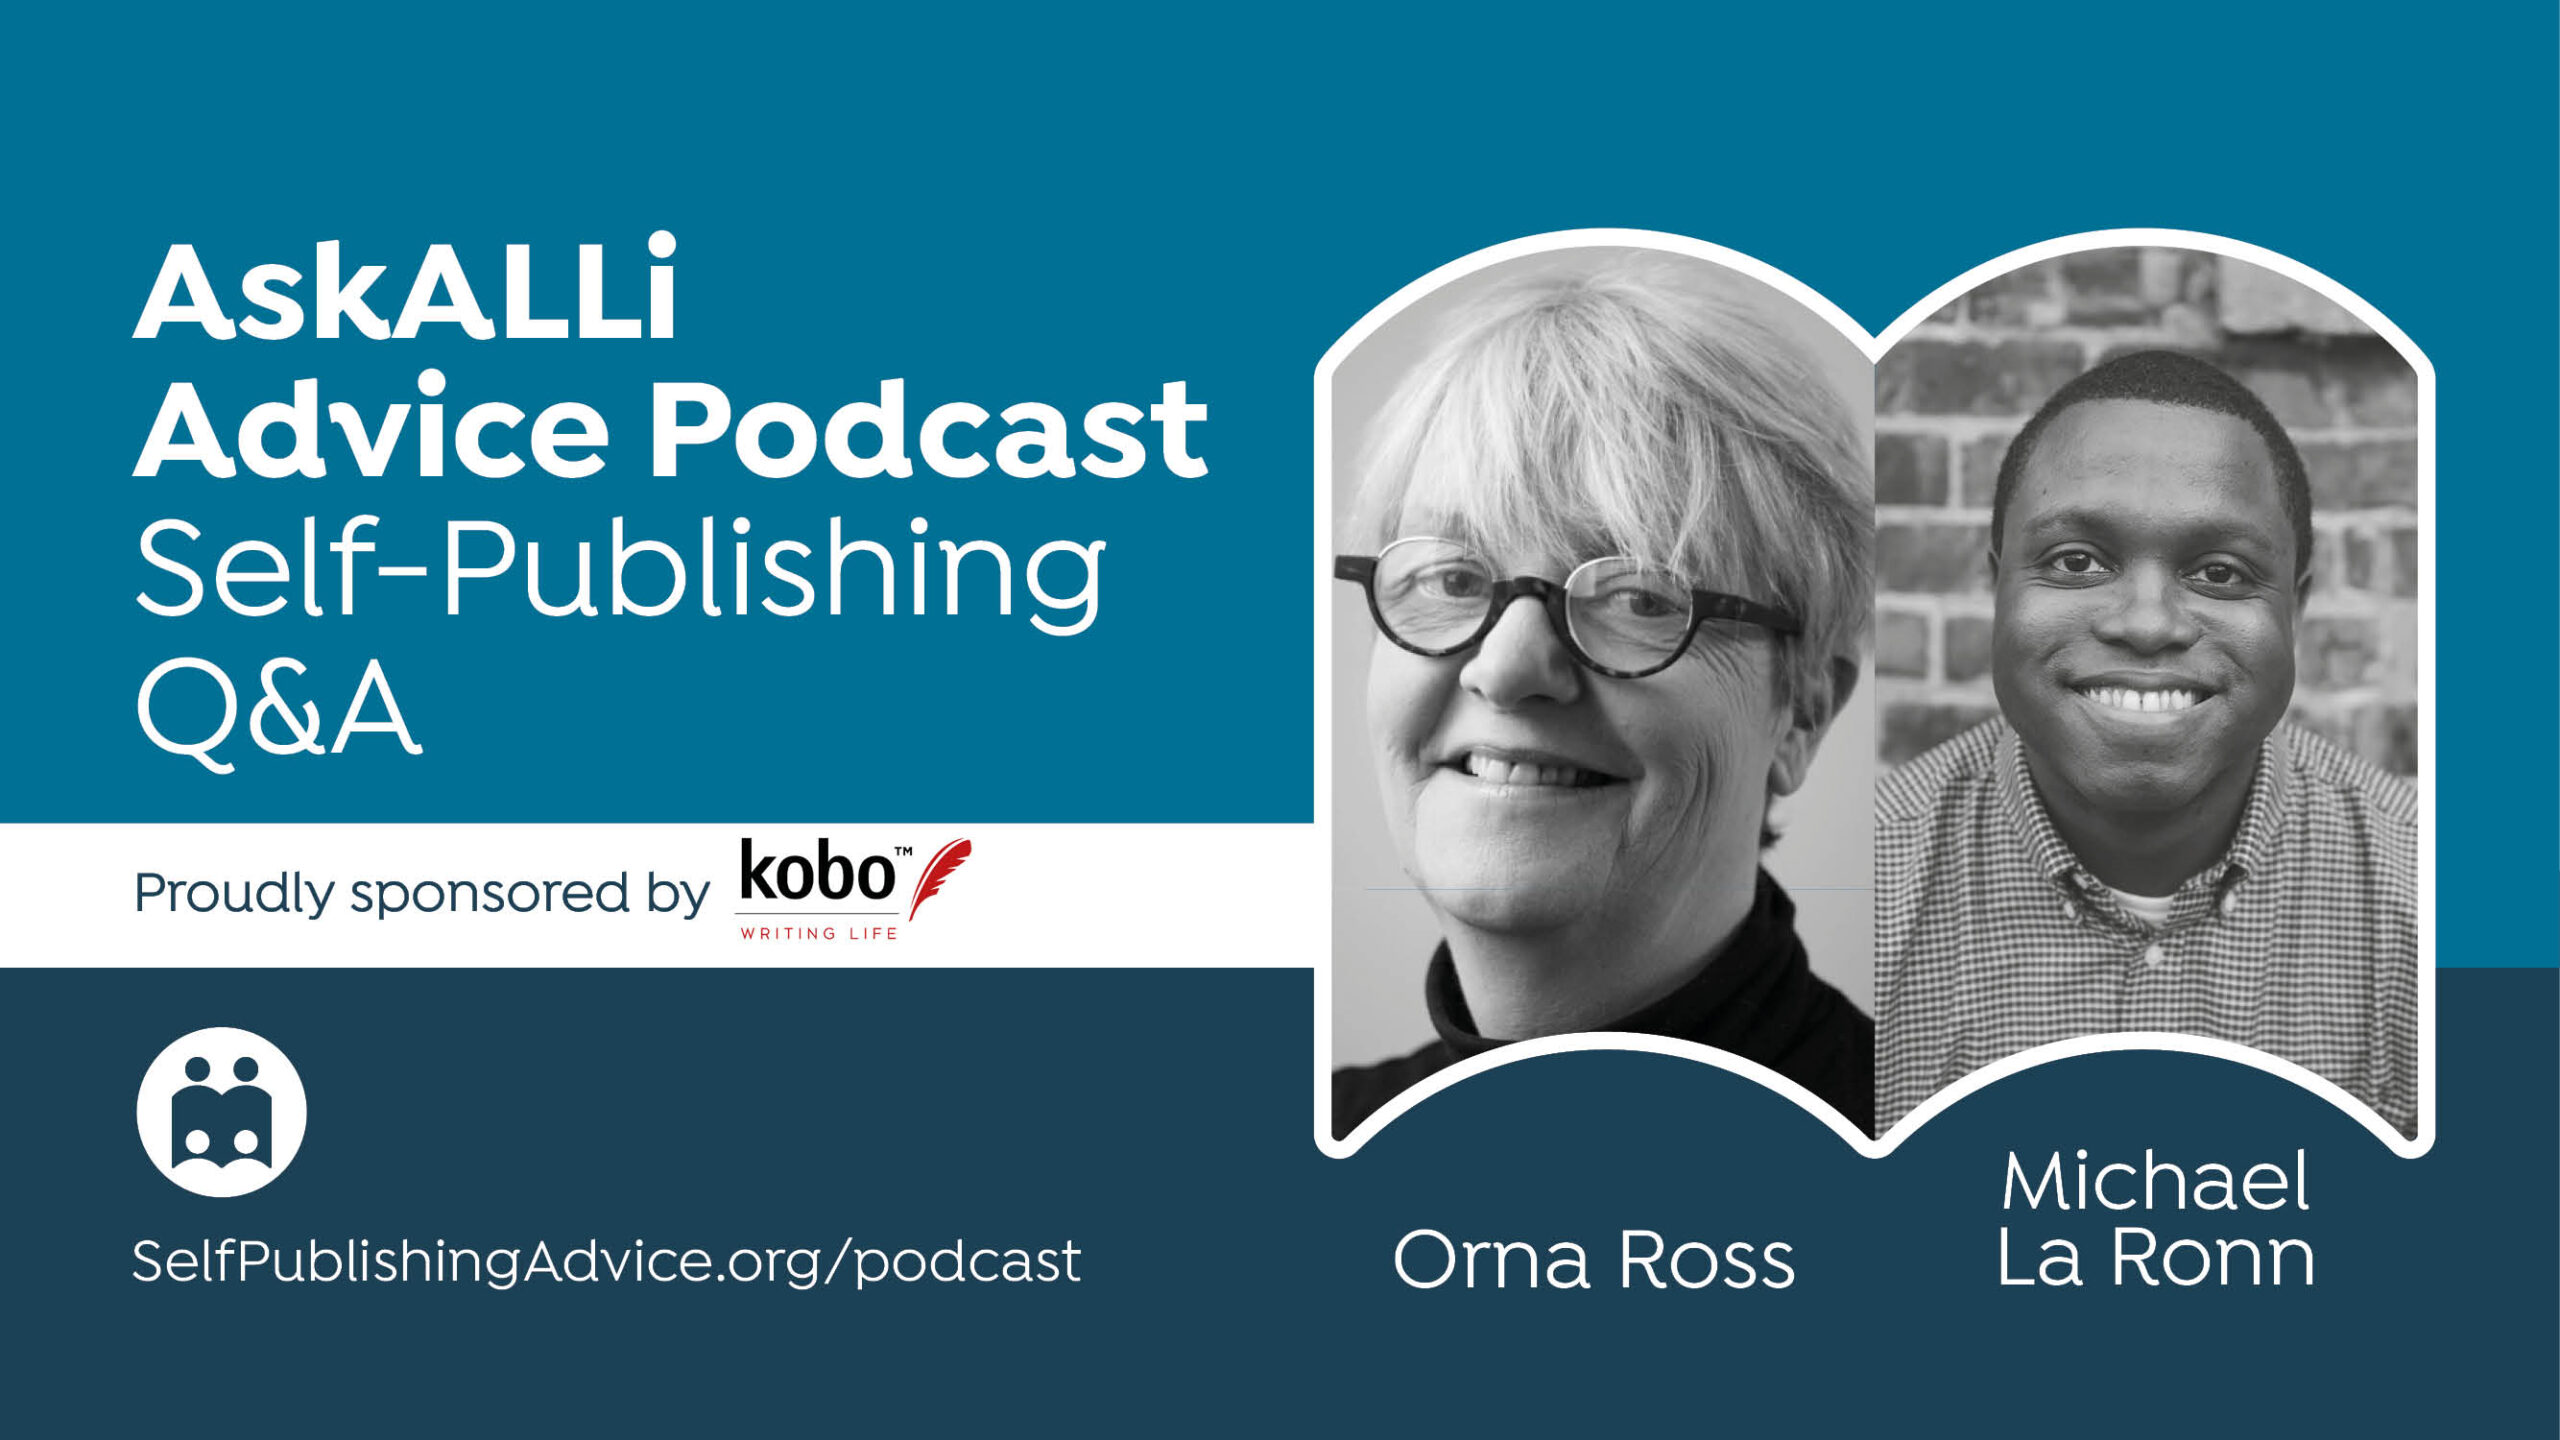 Do I Have To Blog To Be Successful At Writing? Other Questions Answered By Orna Ross And Michael La Ronn In Our Member Q&A Podcast